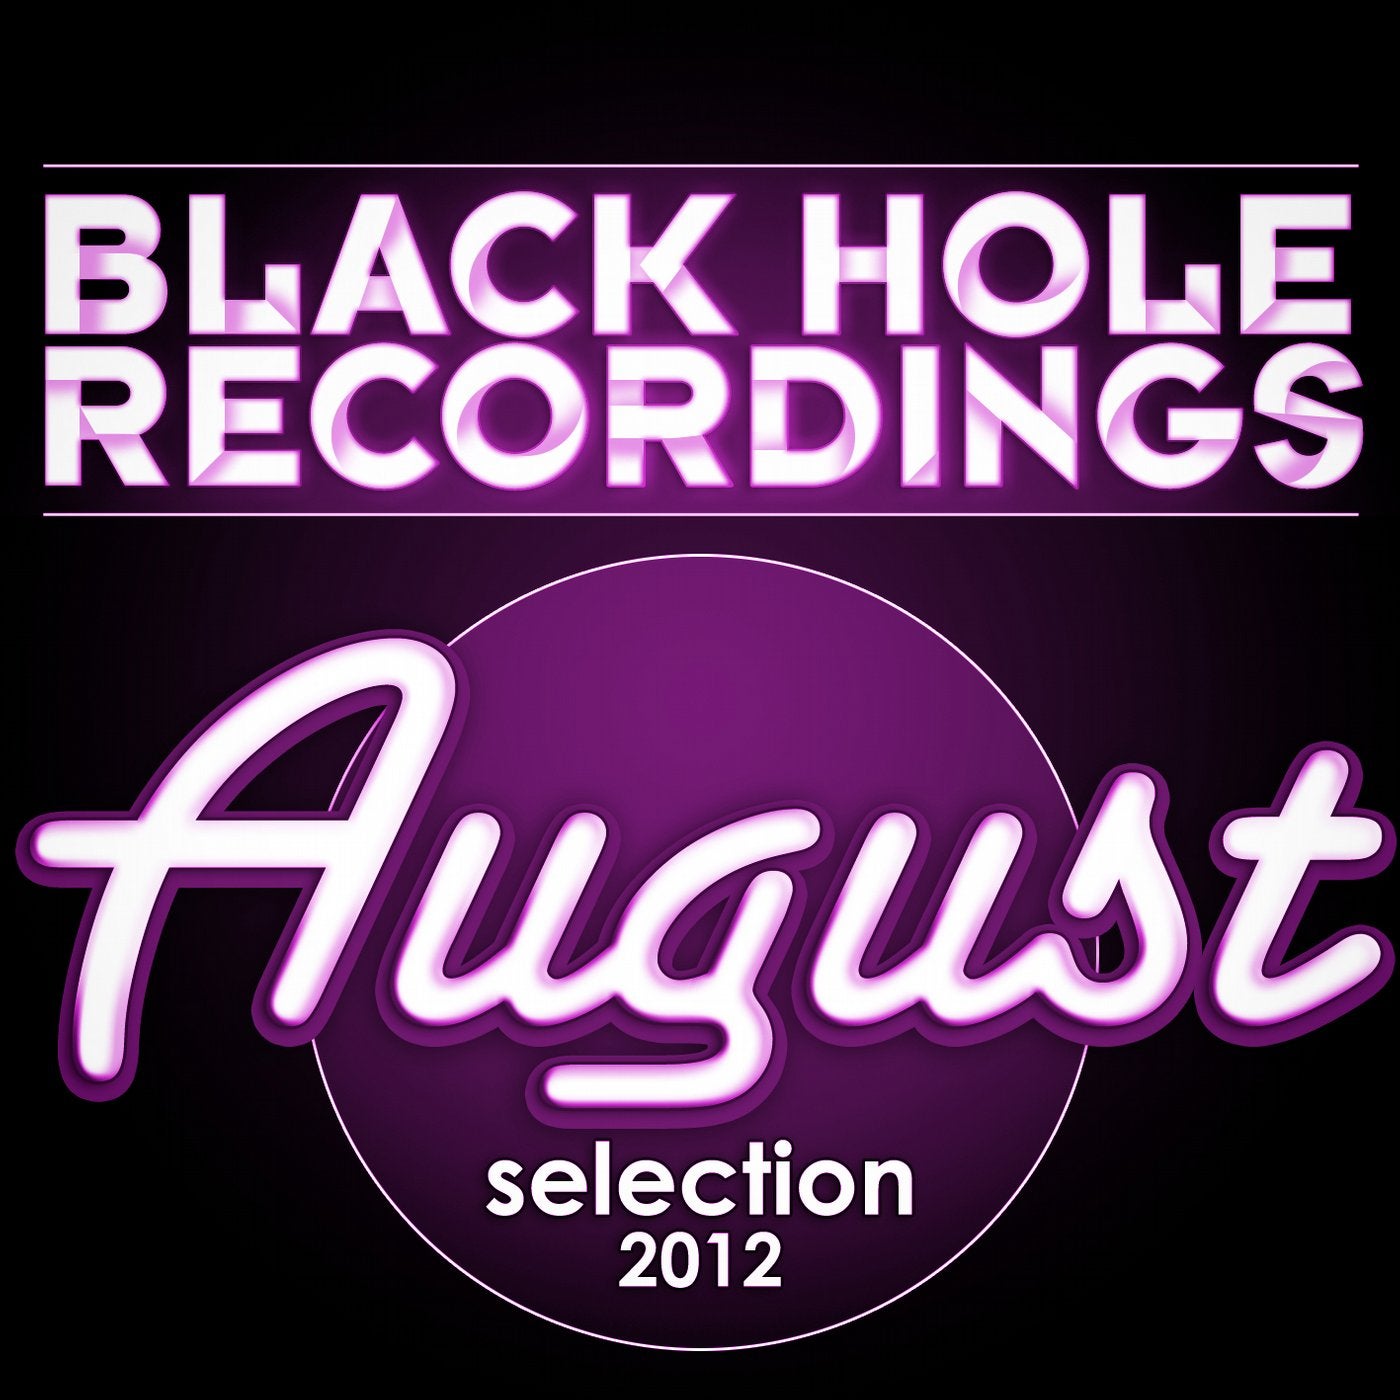 Black Hole Recordings August 2012 Selection